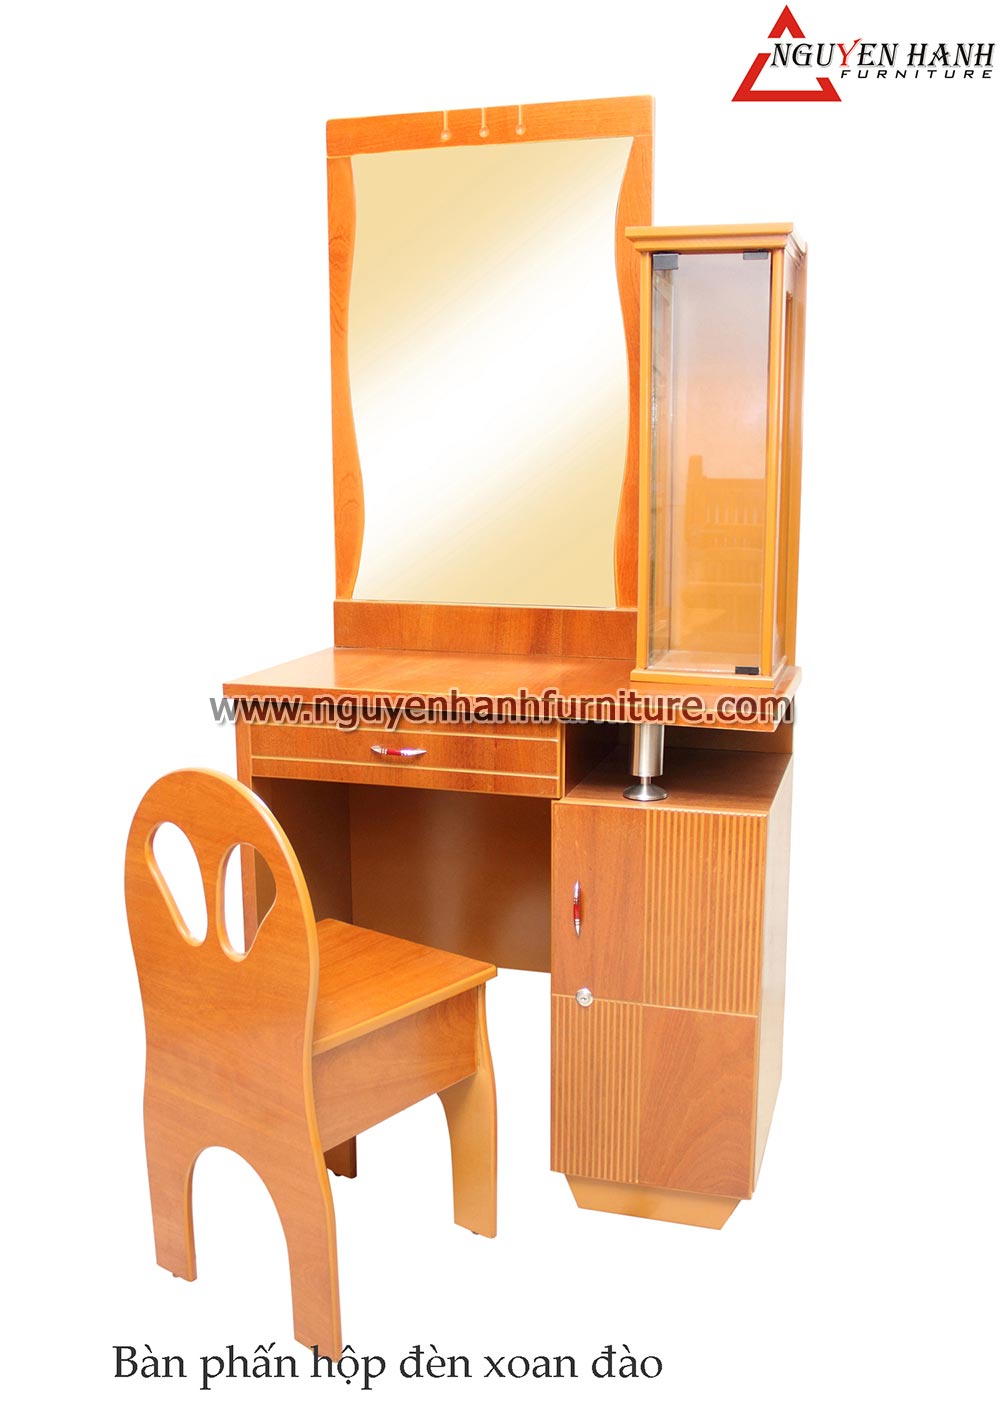 Name product: Light box style Makeup Desk of Bead